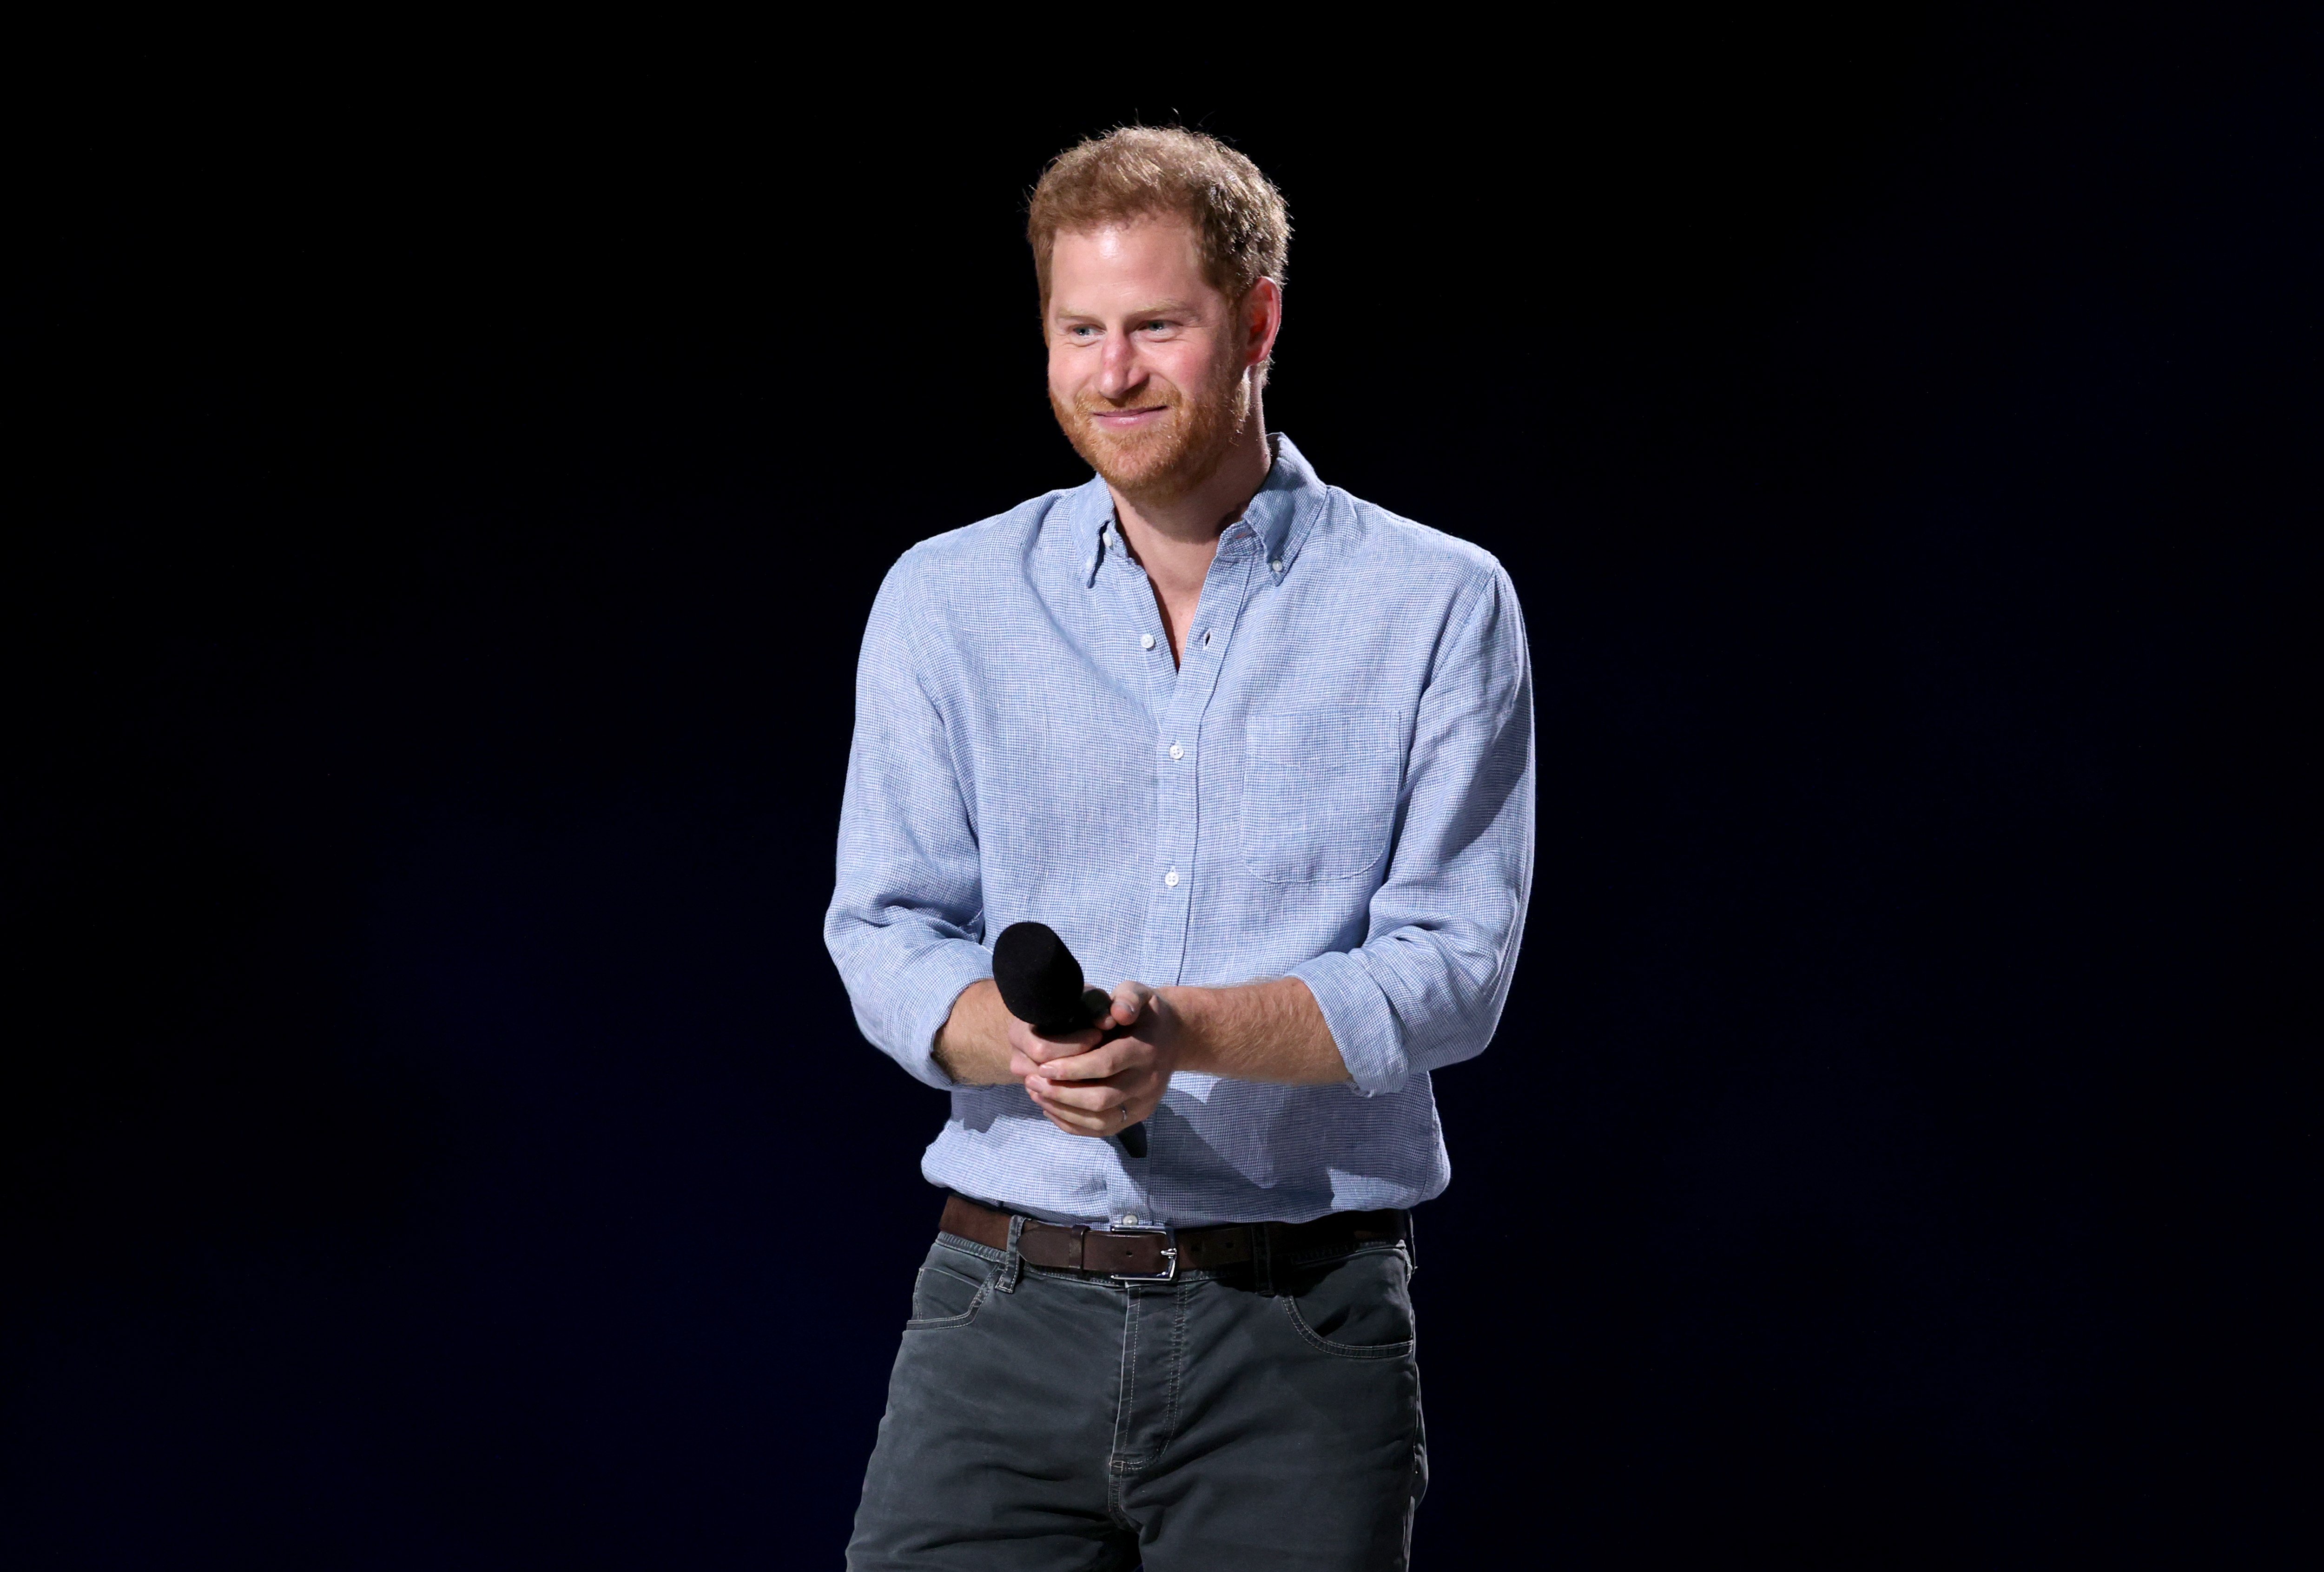 Prince Harry at the Global Citizen VAX LIVE: The Concert To Reunite The World will be broadcast on May 8, 2021.| Photo: Getty Images